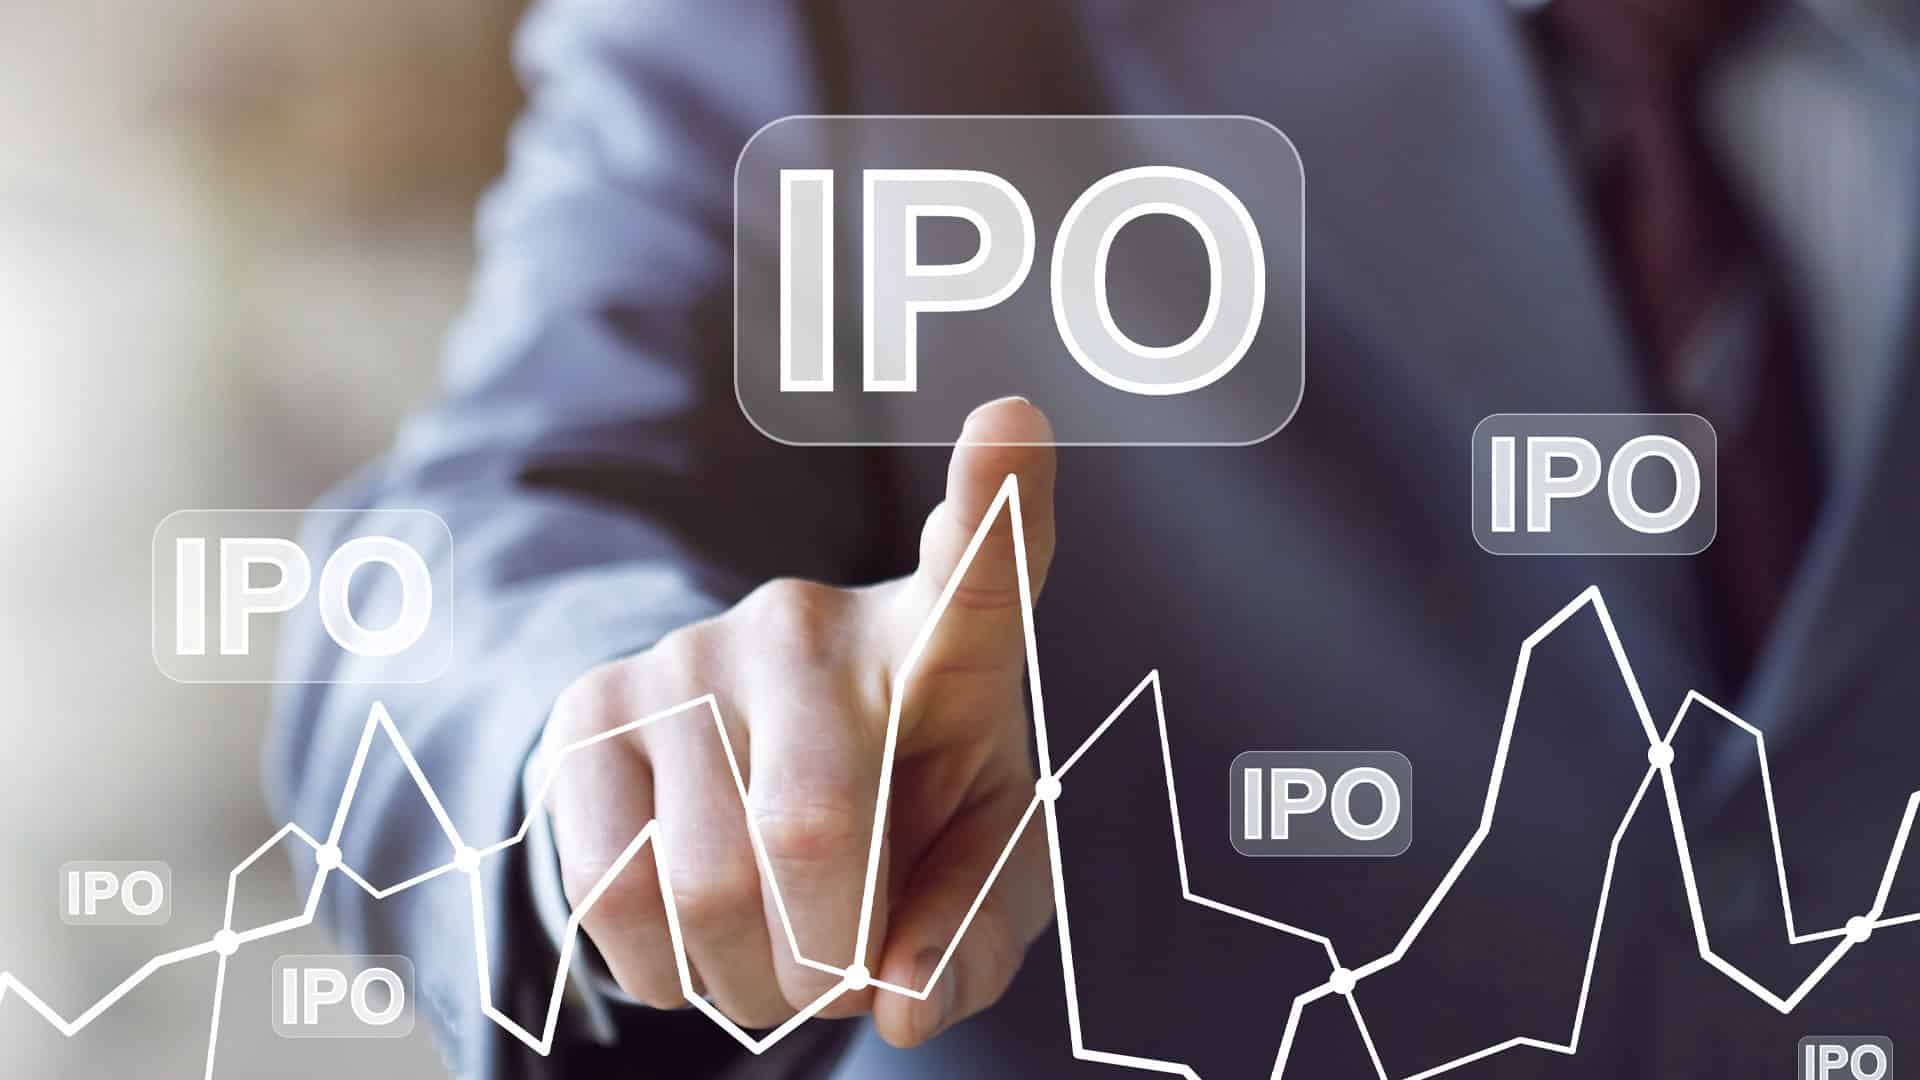 Avalon Technologies' Rs 865-cr IPO to kick off on Apr 3